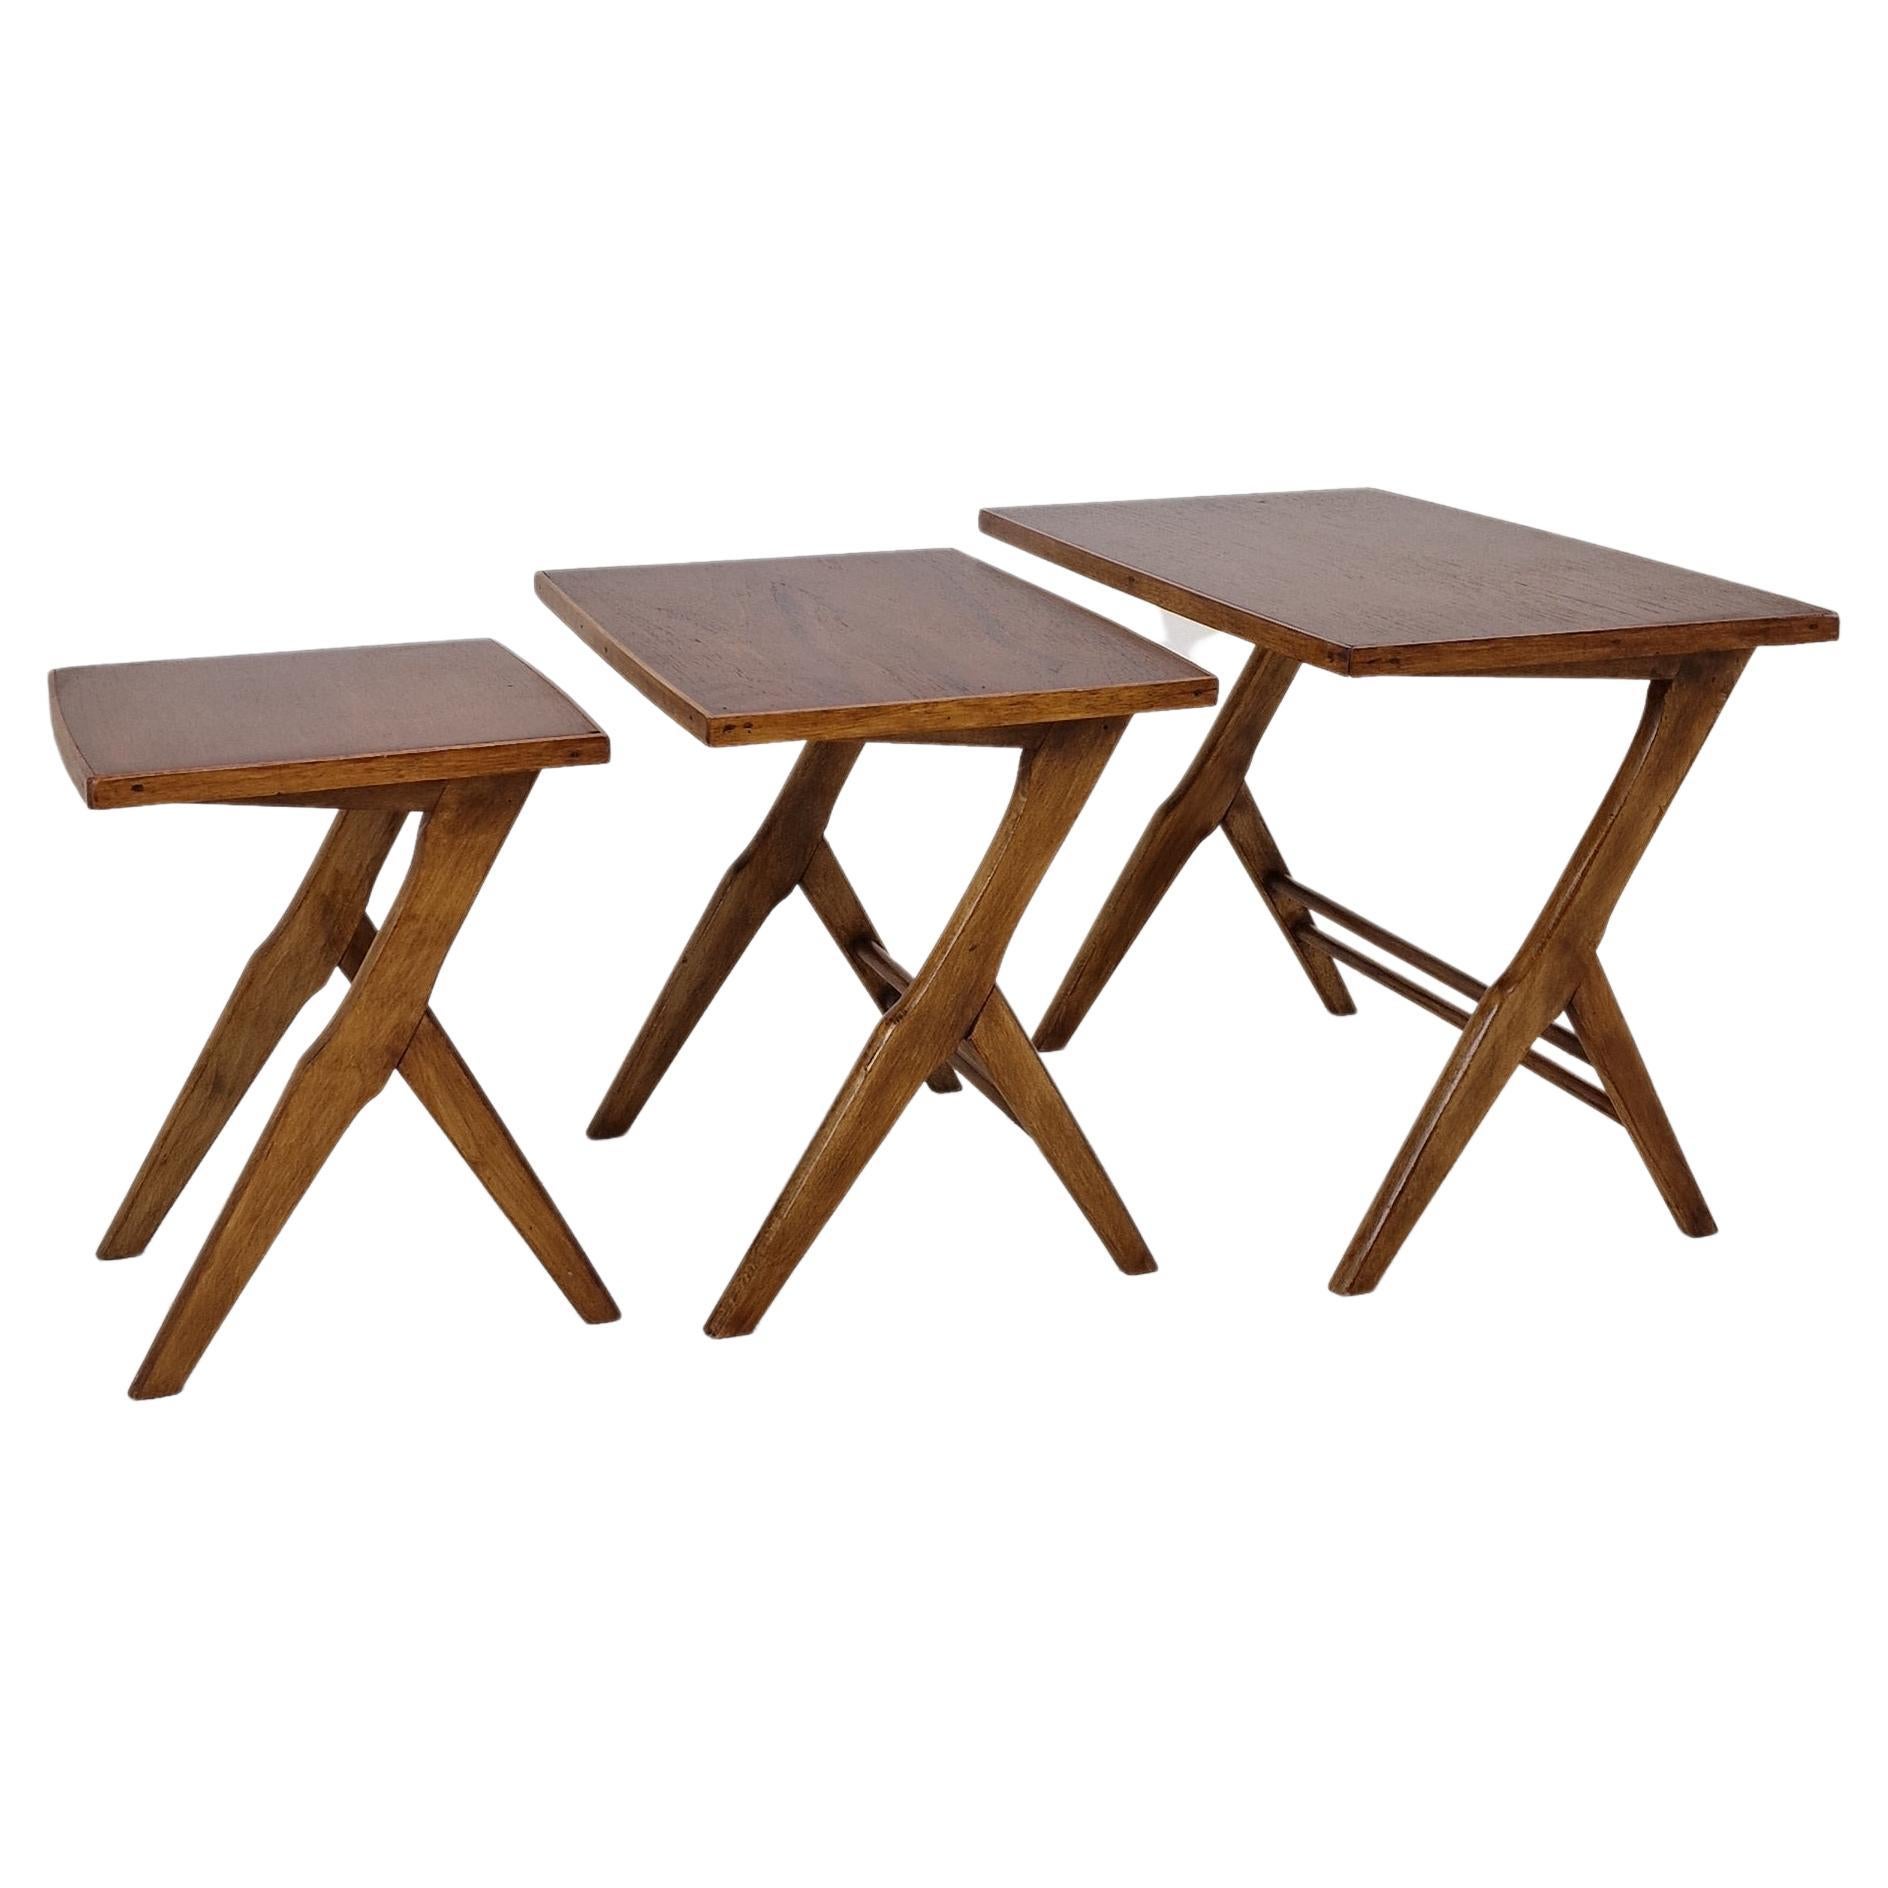 Set of 3 Wooden Nesting Tables, Holland 1960s For Sale